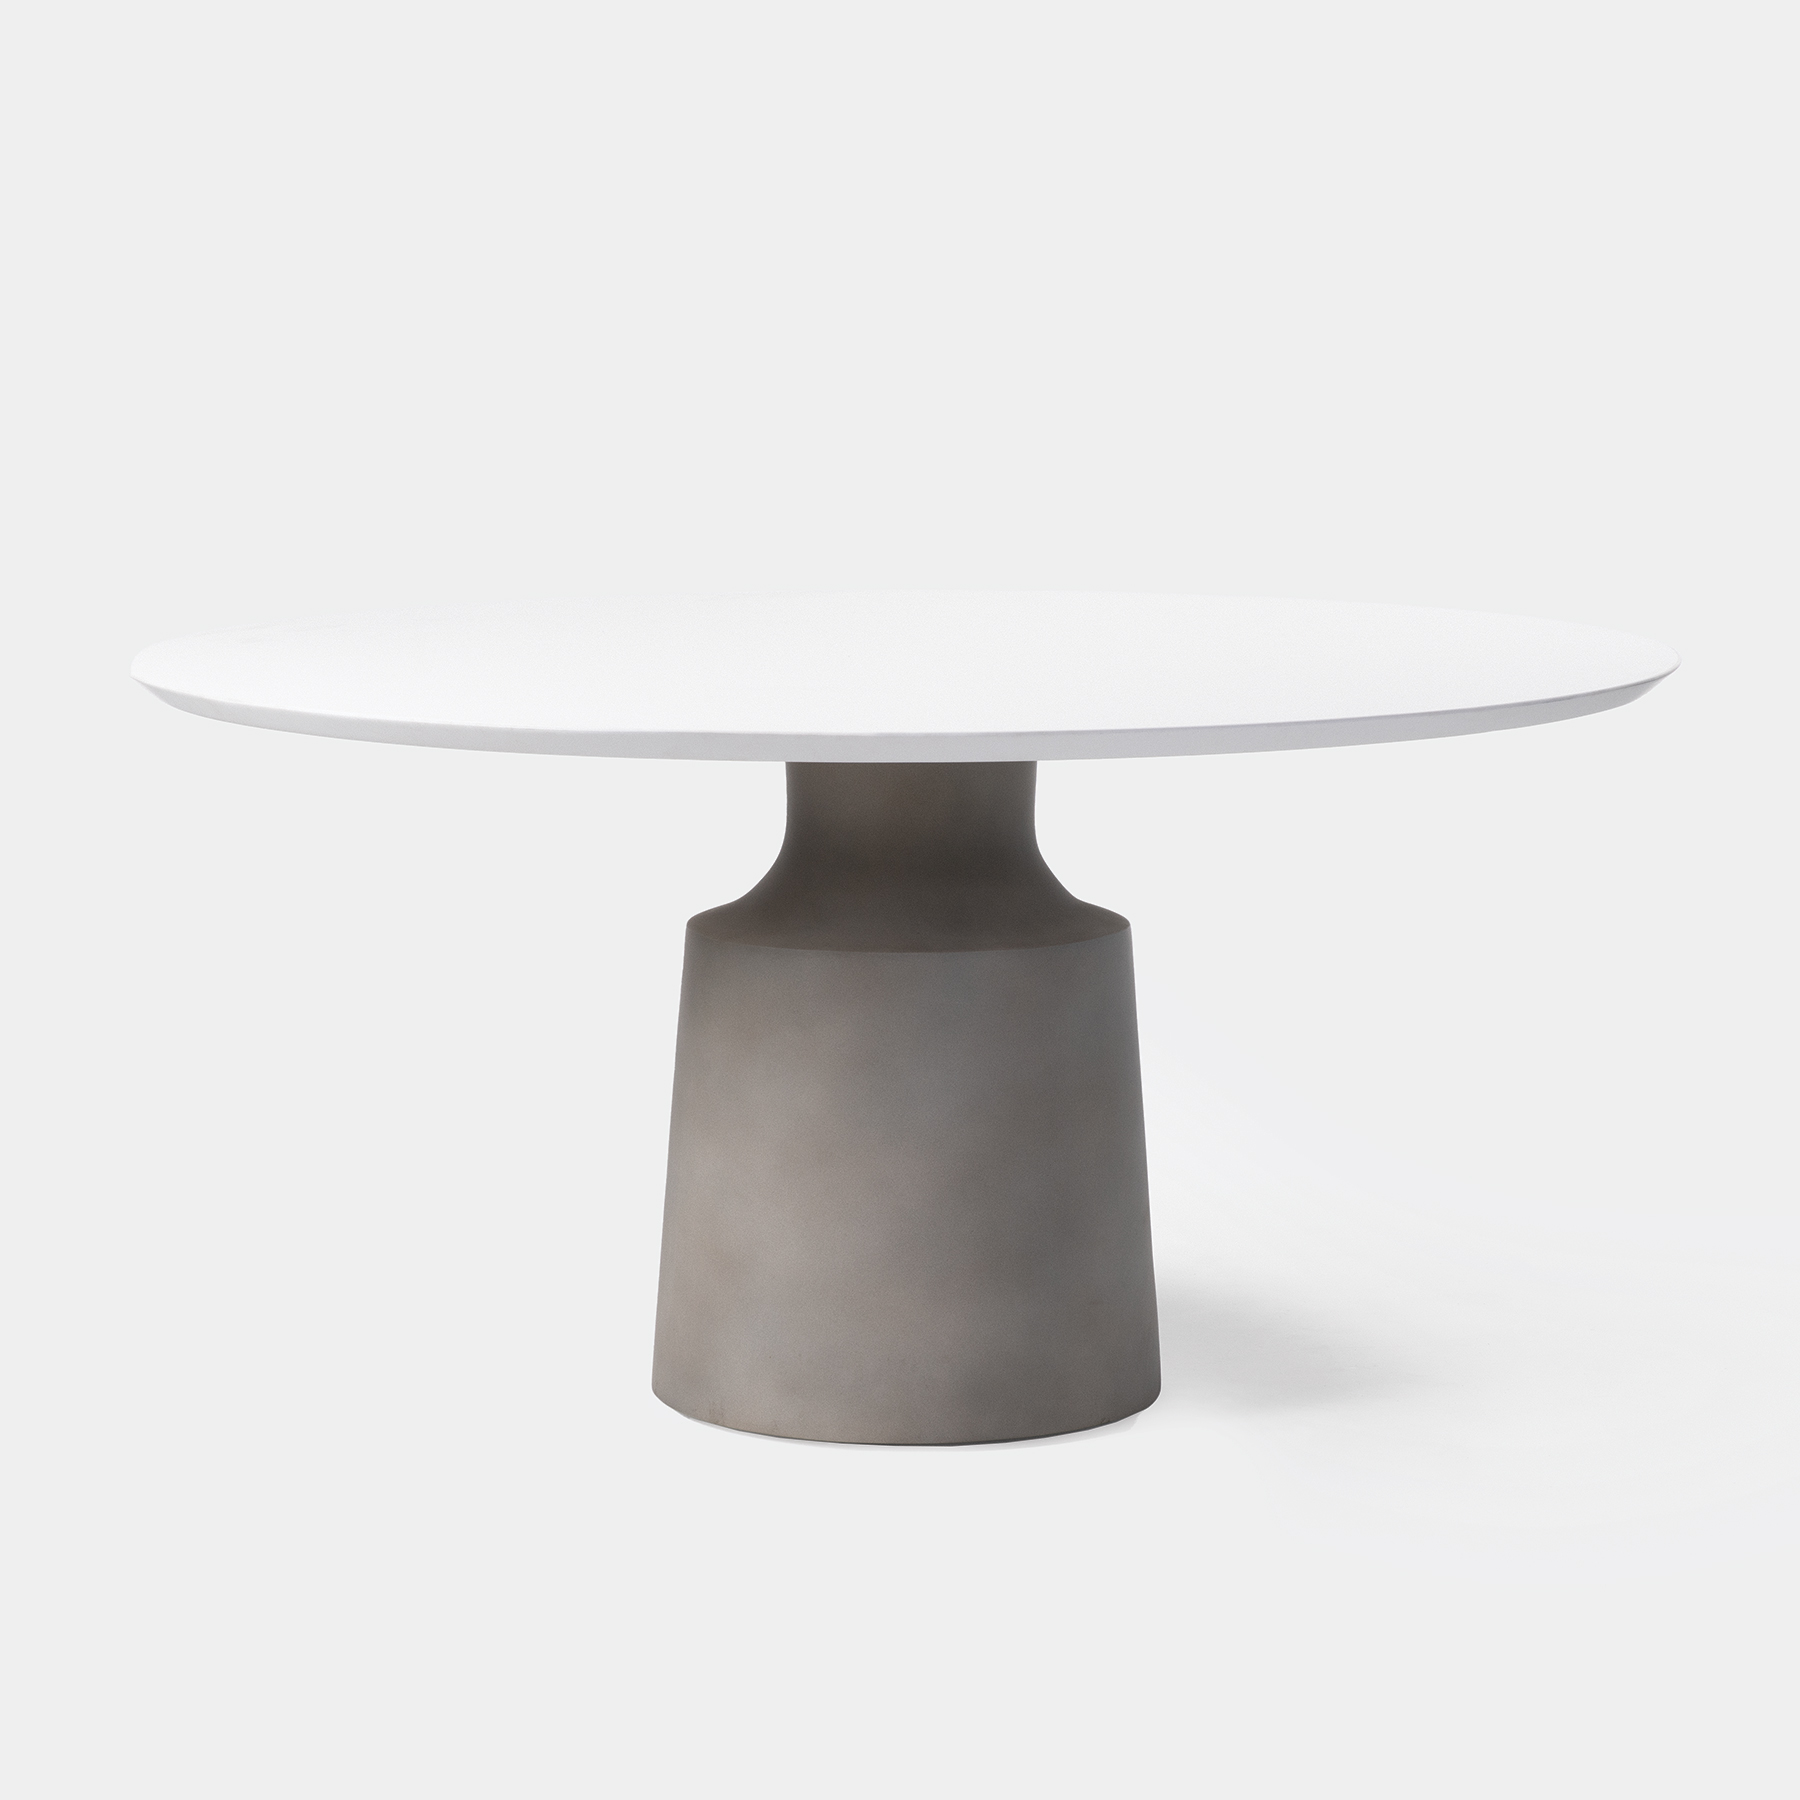 Peso Dining Table - Outdoor, Sz 2, Pure White Stone Top, Sand Grey Base